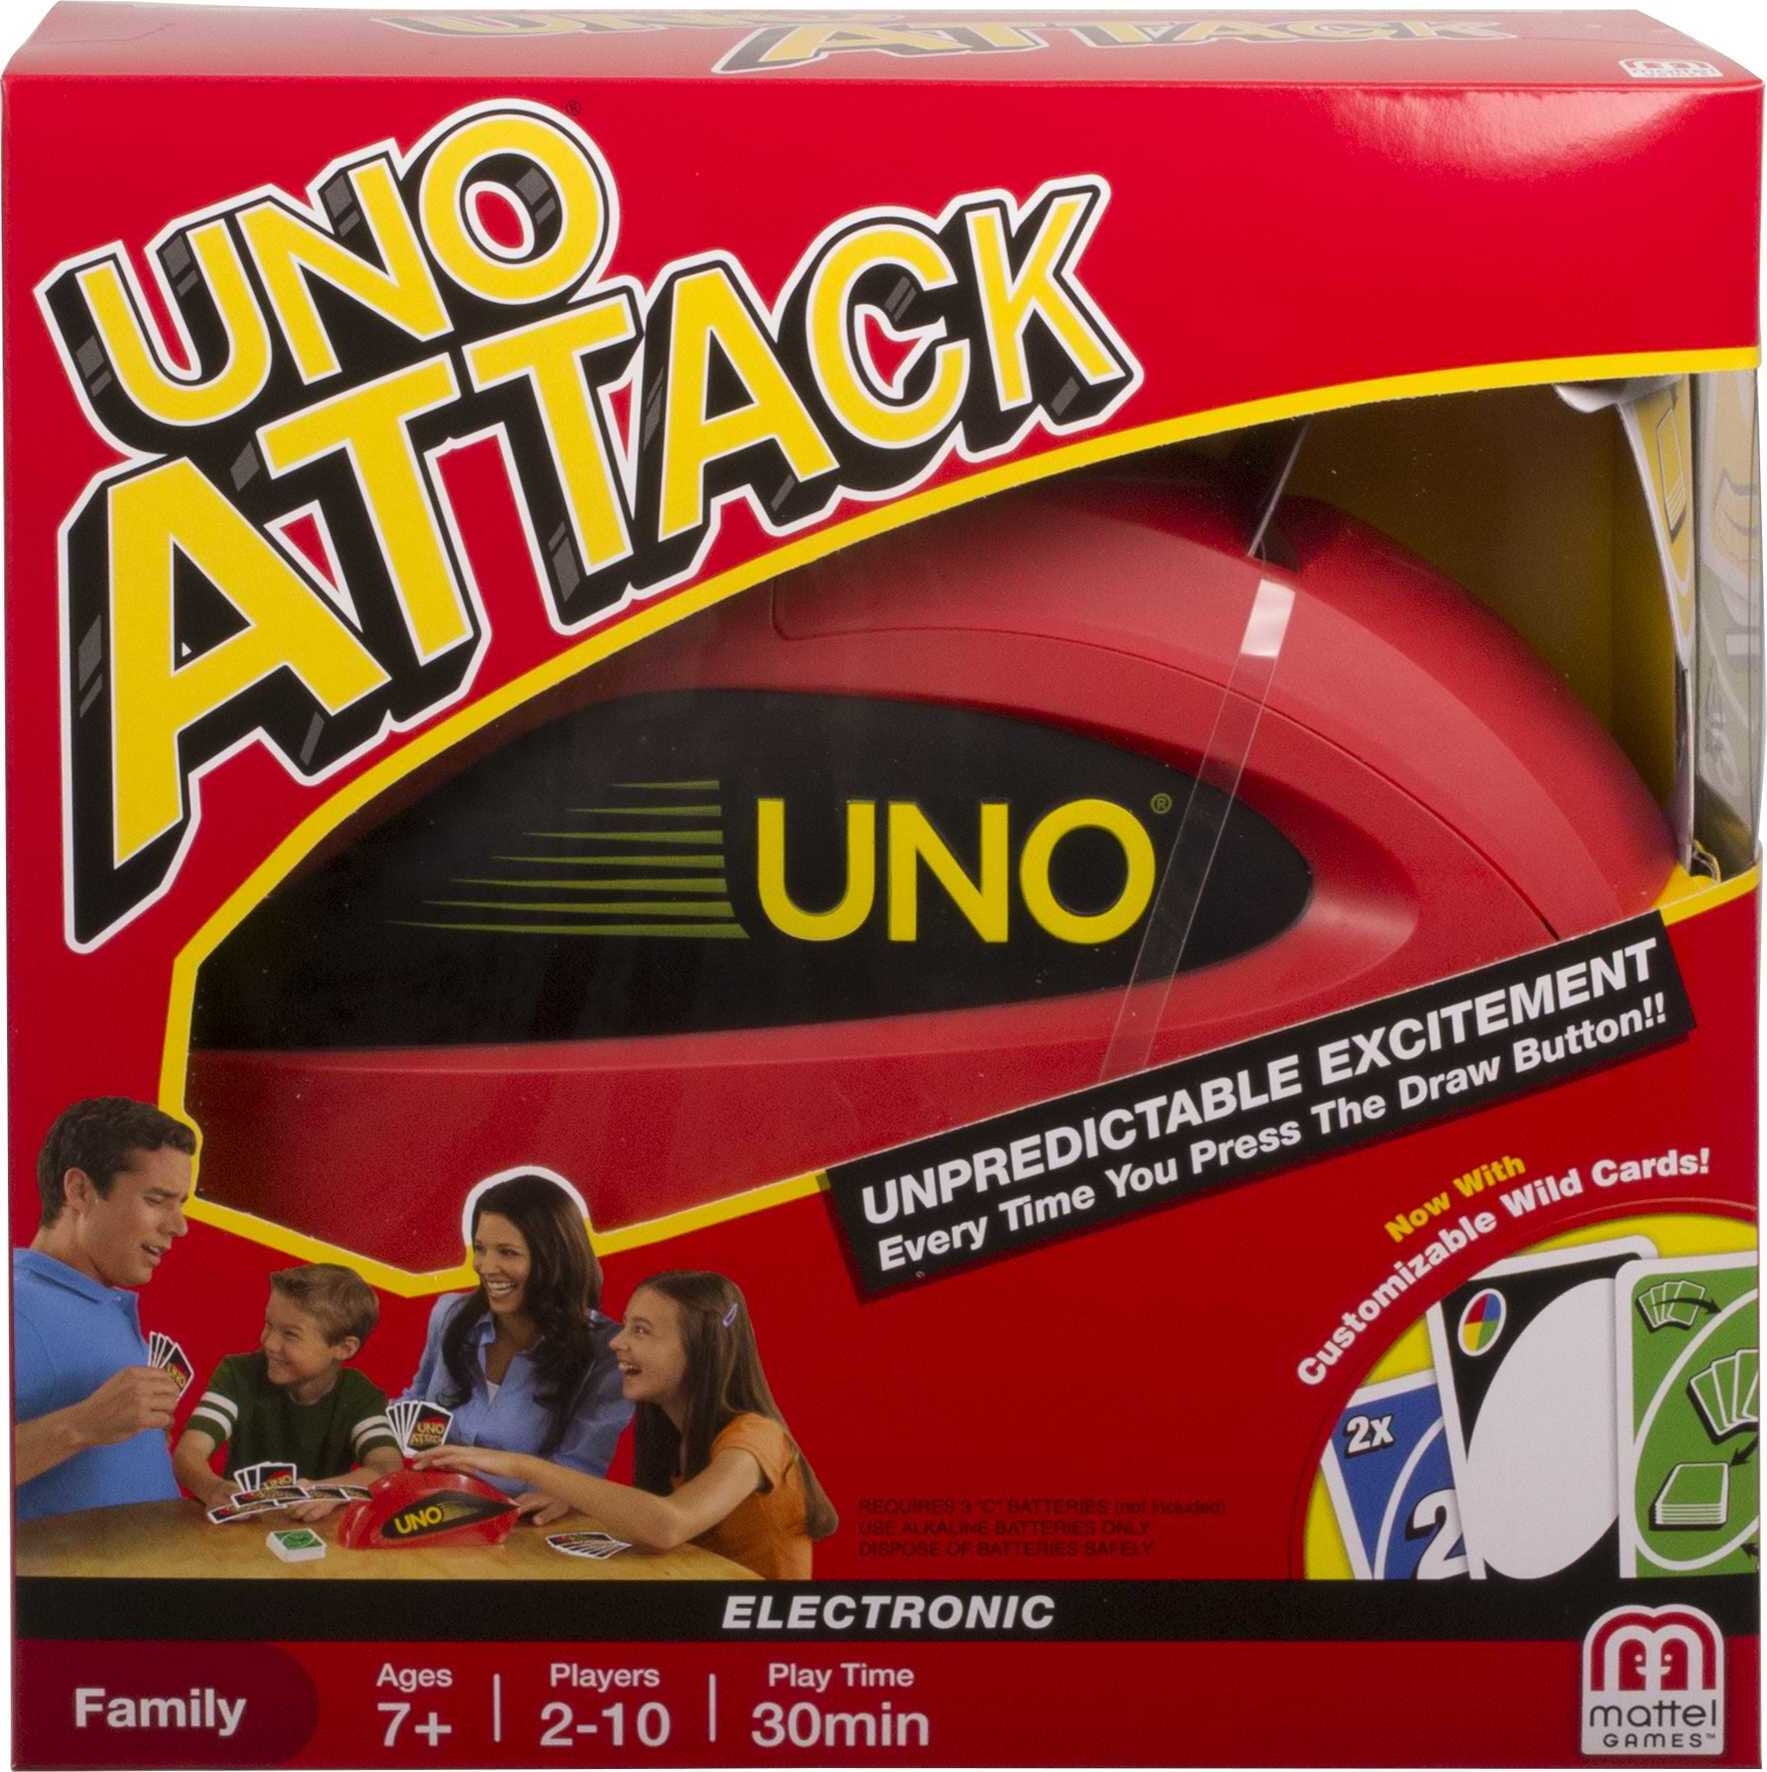 UNO Card Fire Rapid Players Ages 2-10 7Y+ for Game ATTACK!